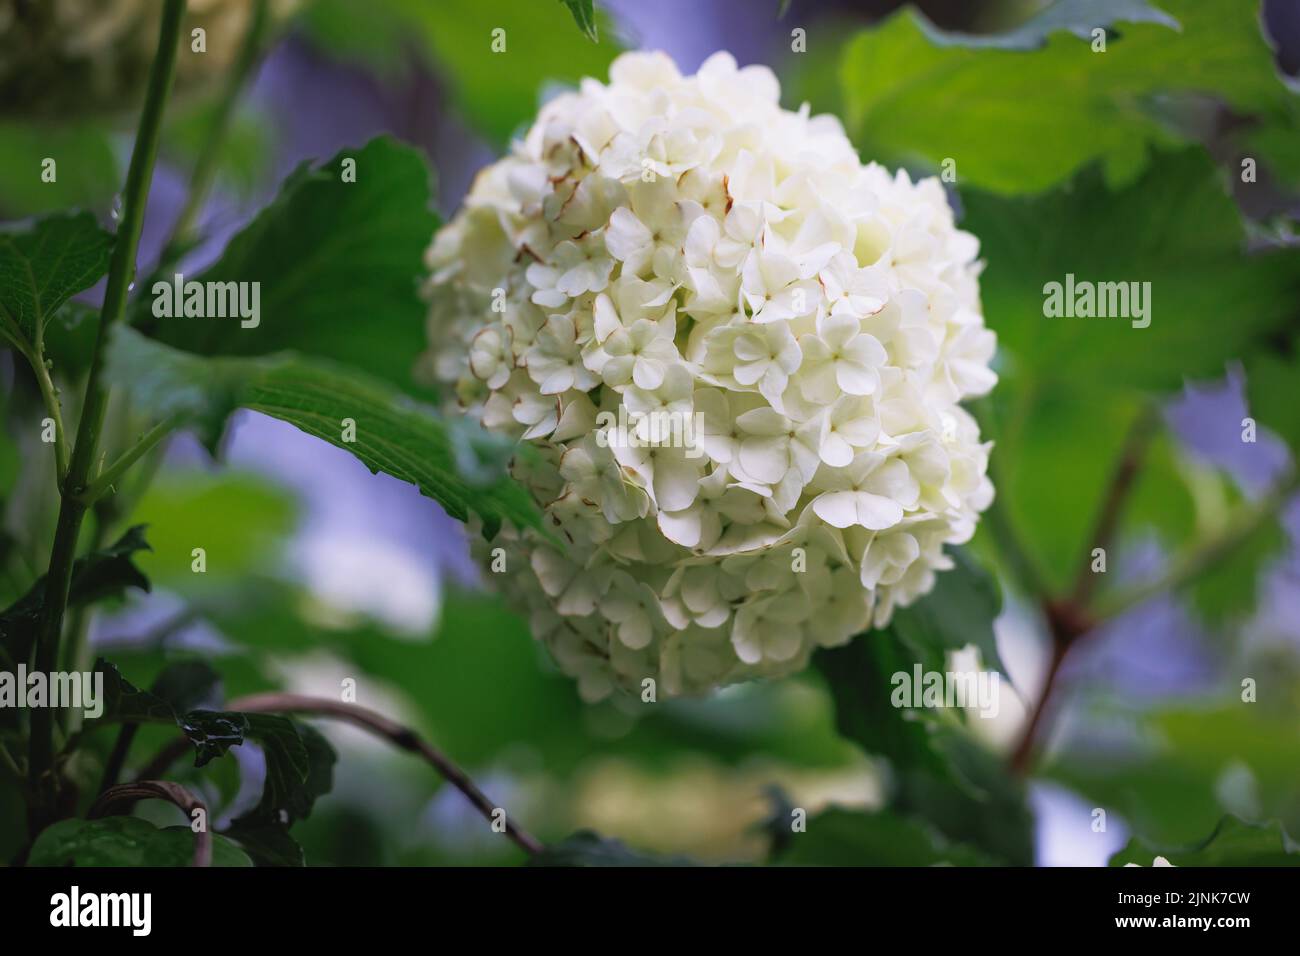 Rounded white flowers of Viburnum plant in the garden Stock Photo